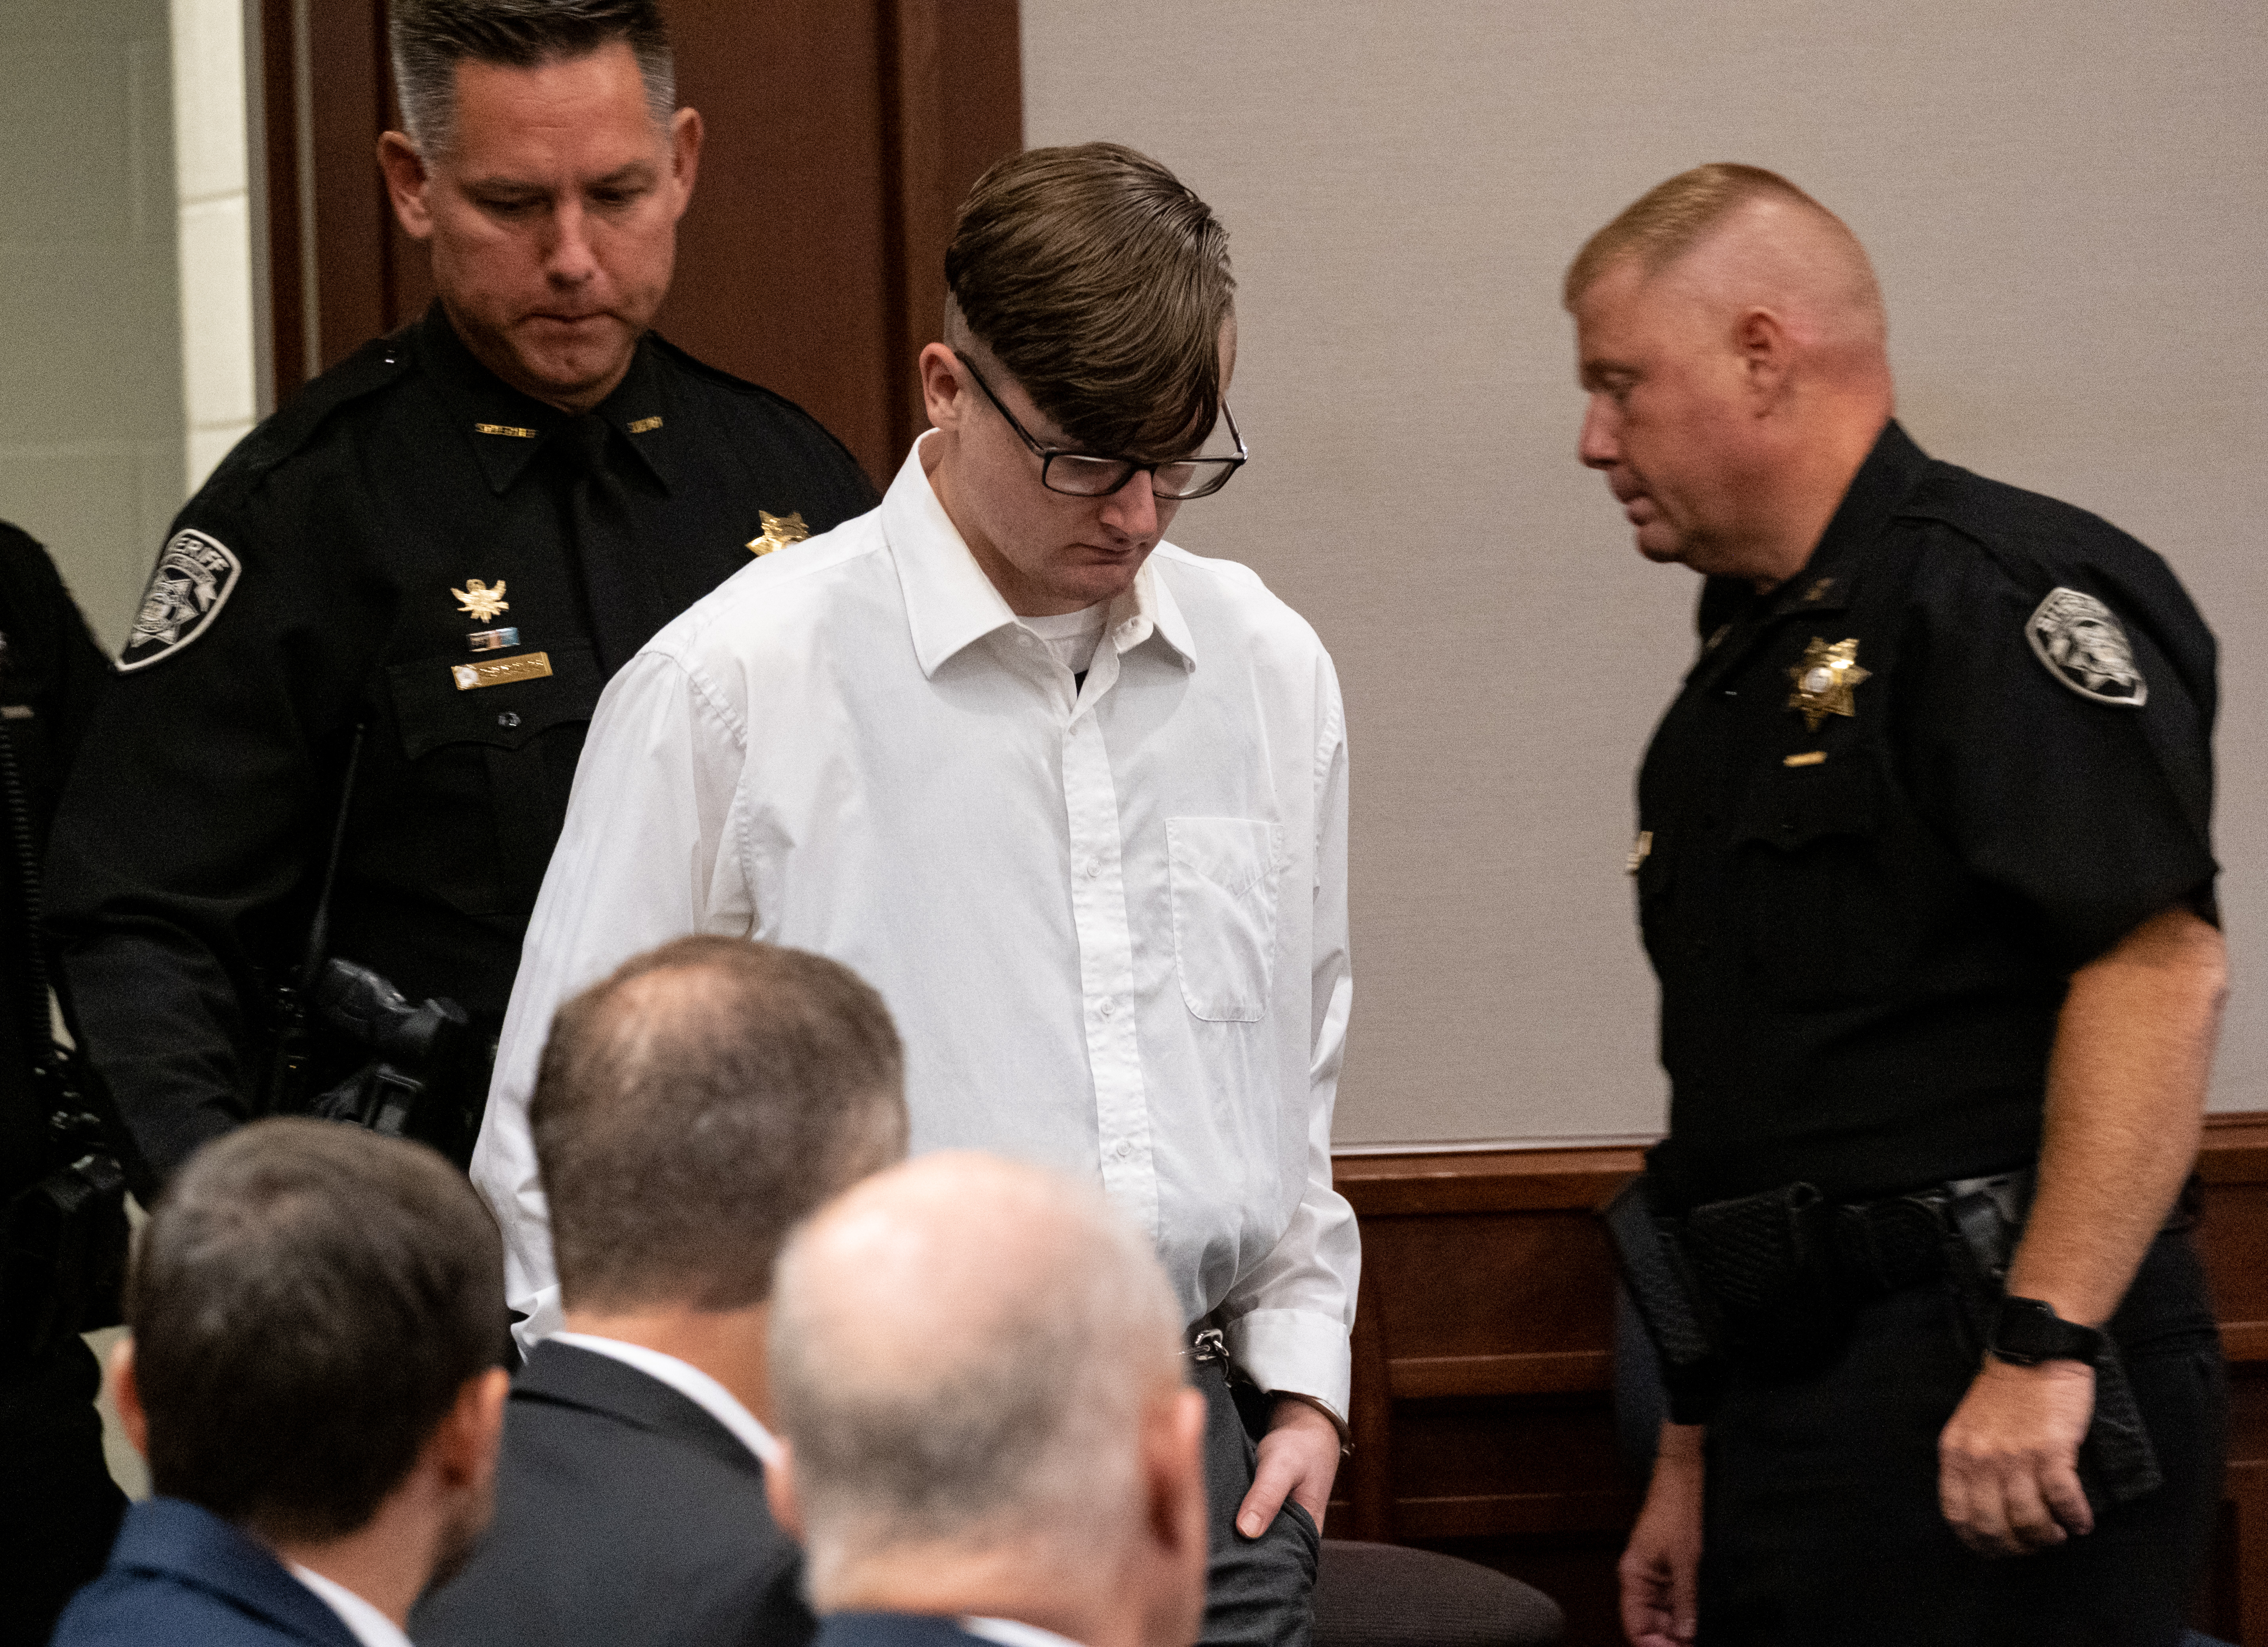 Swift justice': Spa shooter gets 4 consecutive life sentences in